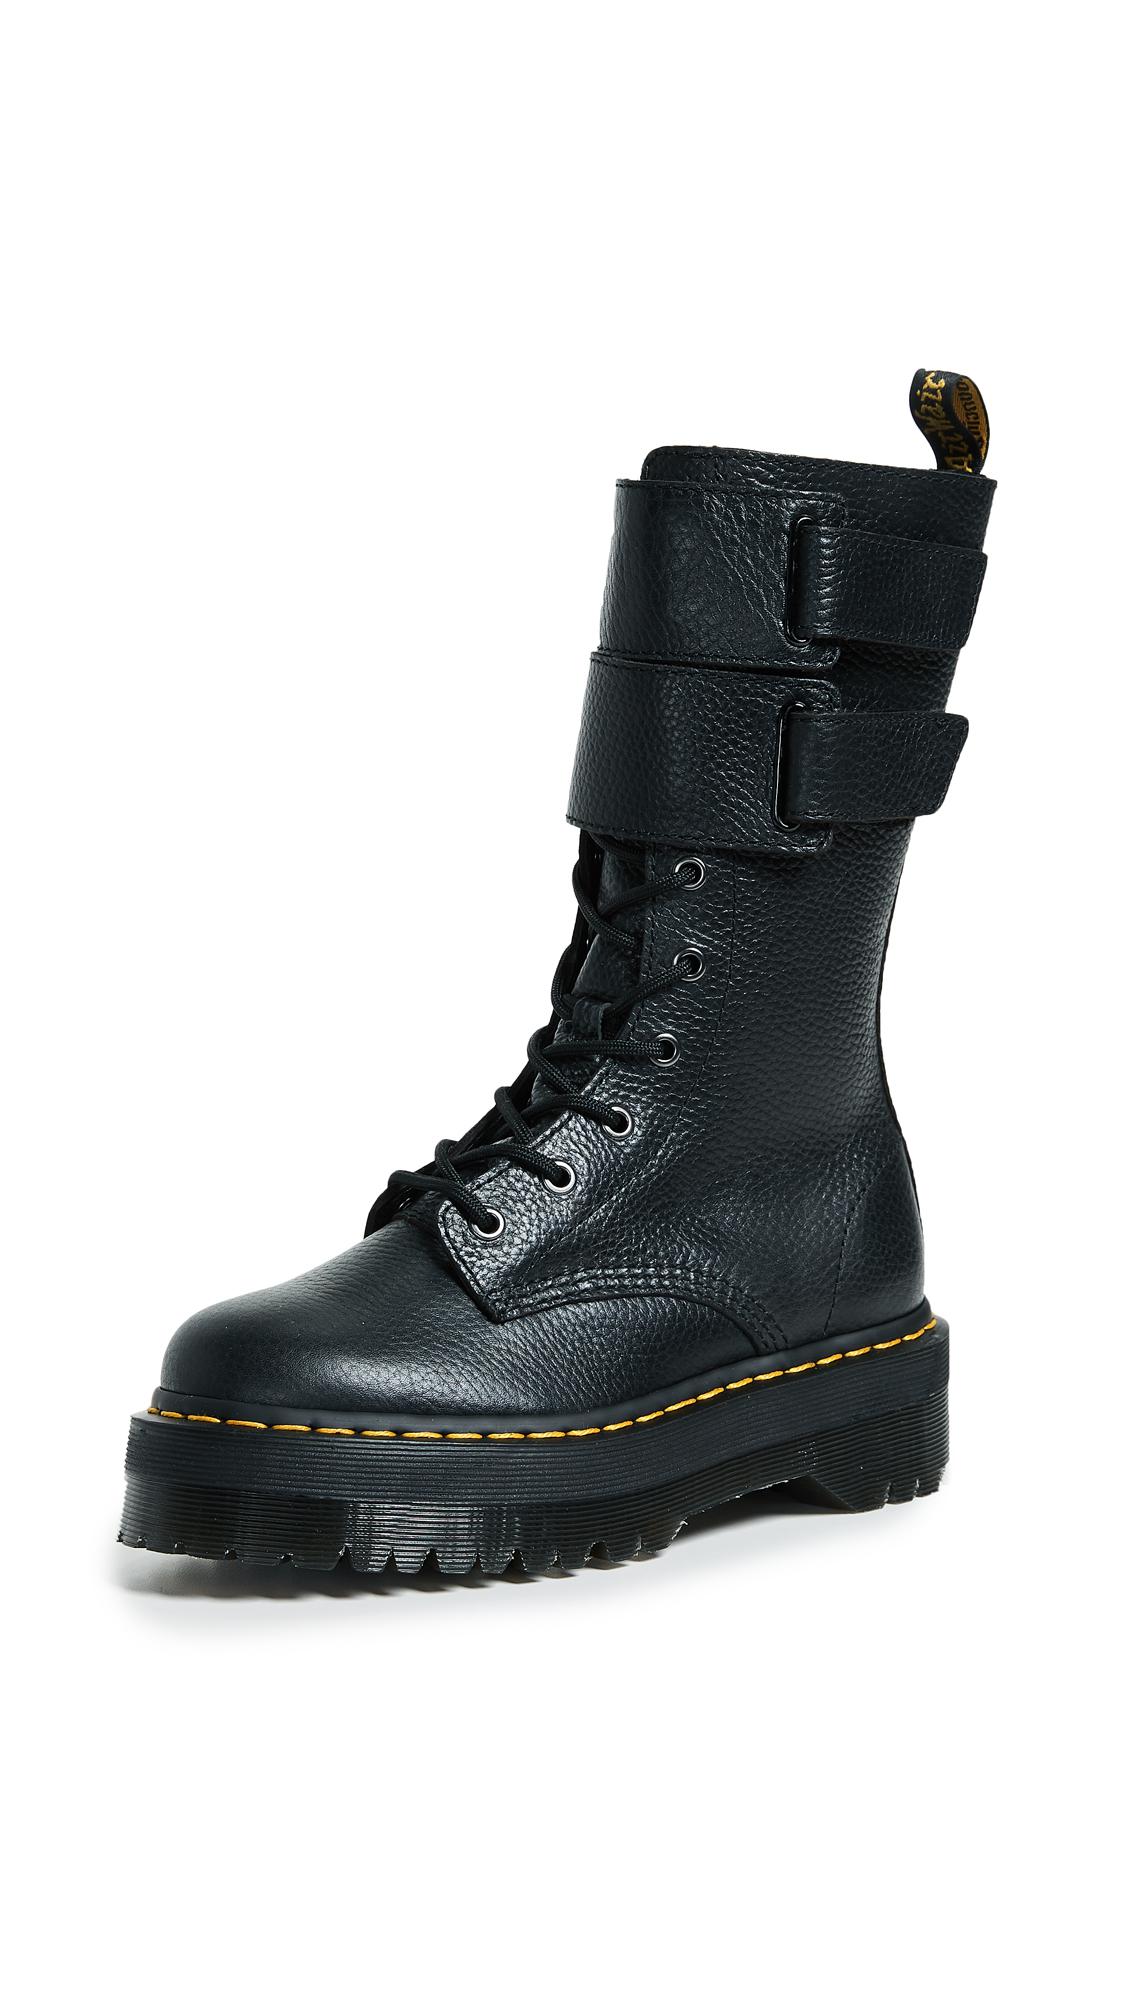 Dr. Martens Leather Jagger 10 Eye Boots in Black - Lyst